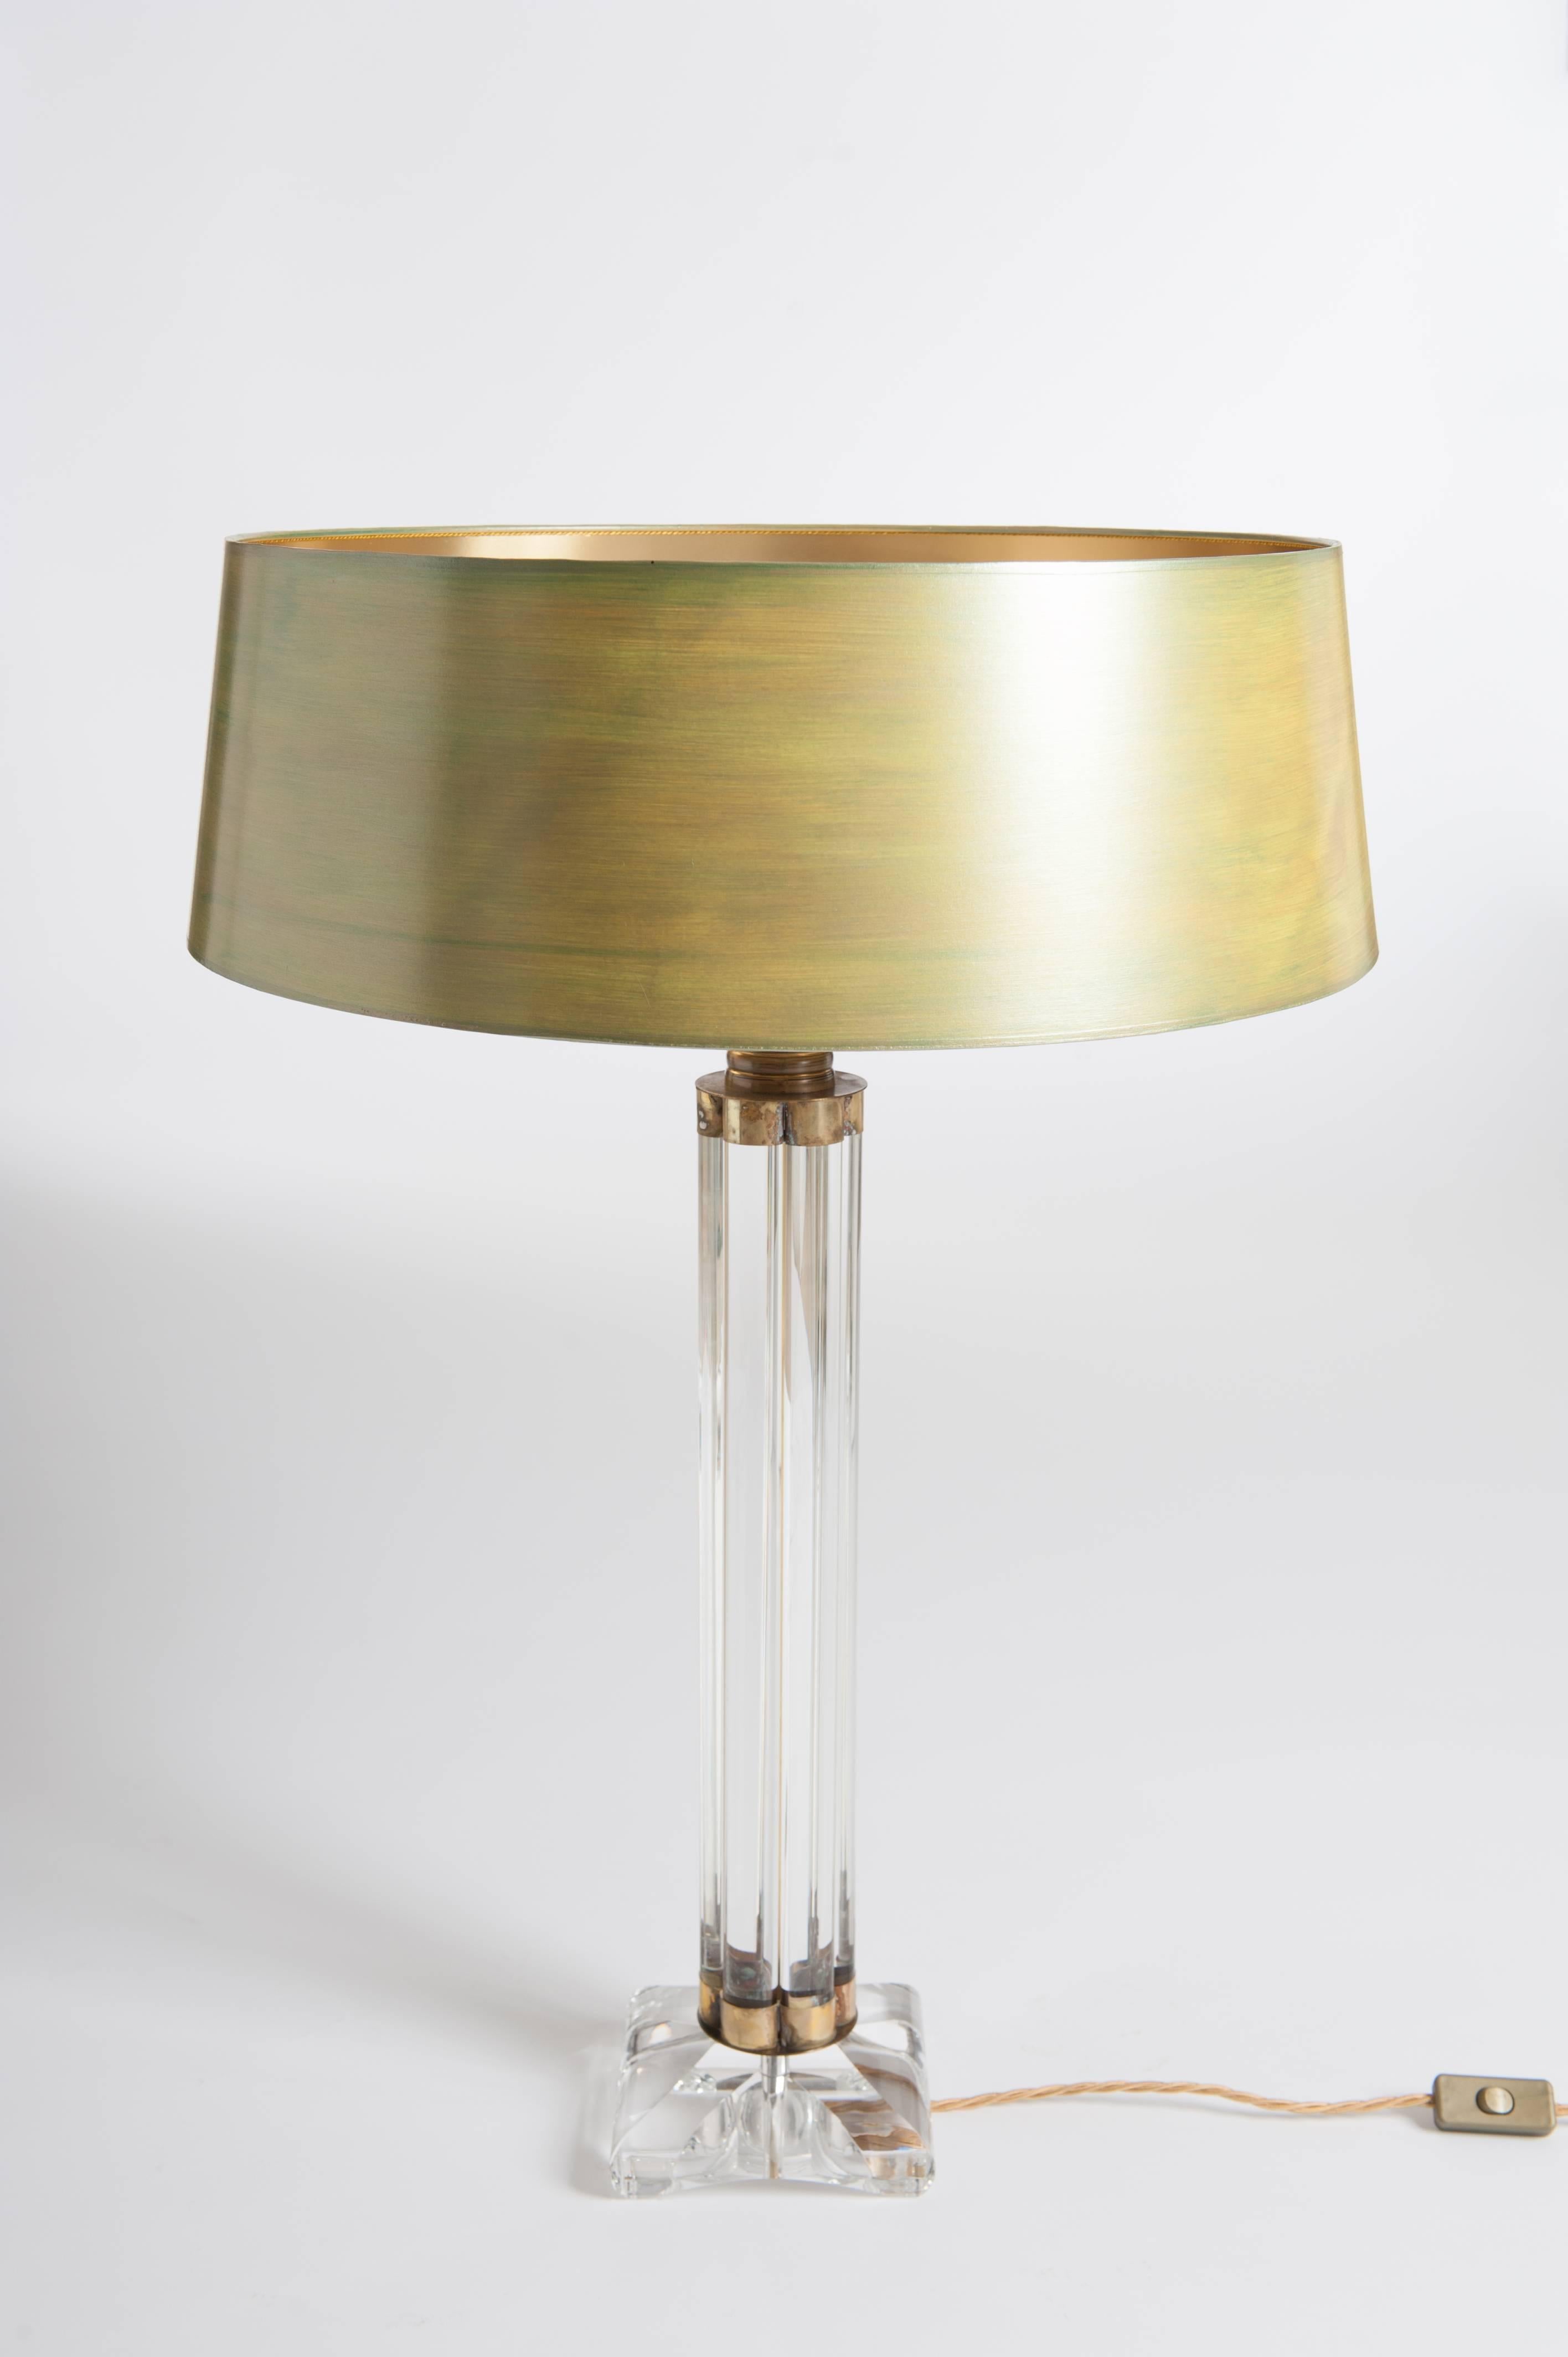 Very elegant and tall Murano glass table lamps with brass mounting.
The feet are built up of several glass sticks.
Hand-painted and beaded lamp shades in a mixture of yellow, green and brown
nuances.

The glass base measures 16cm x 16cm, 
the